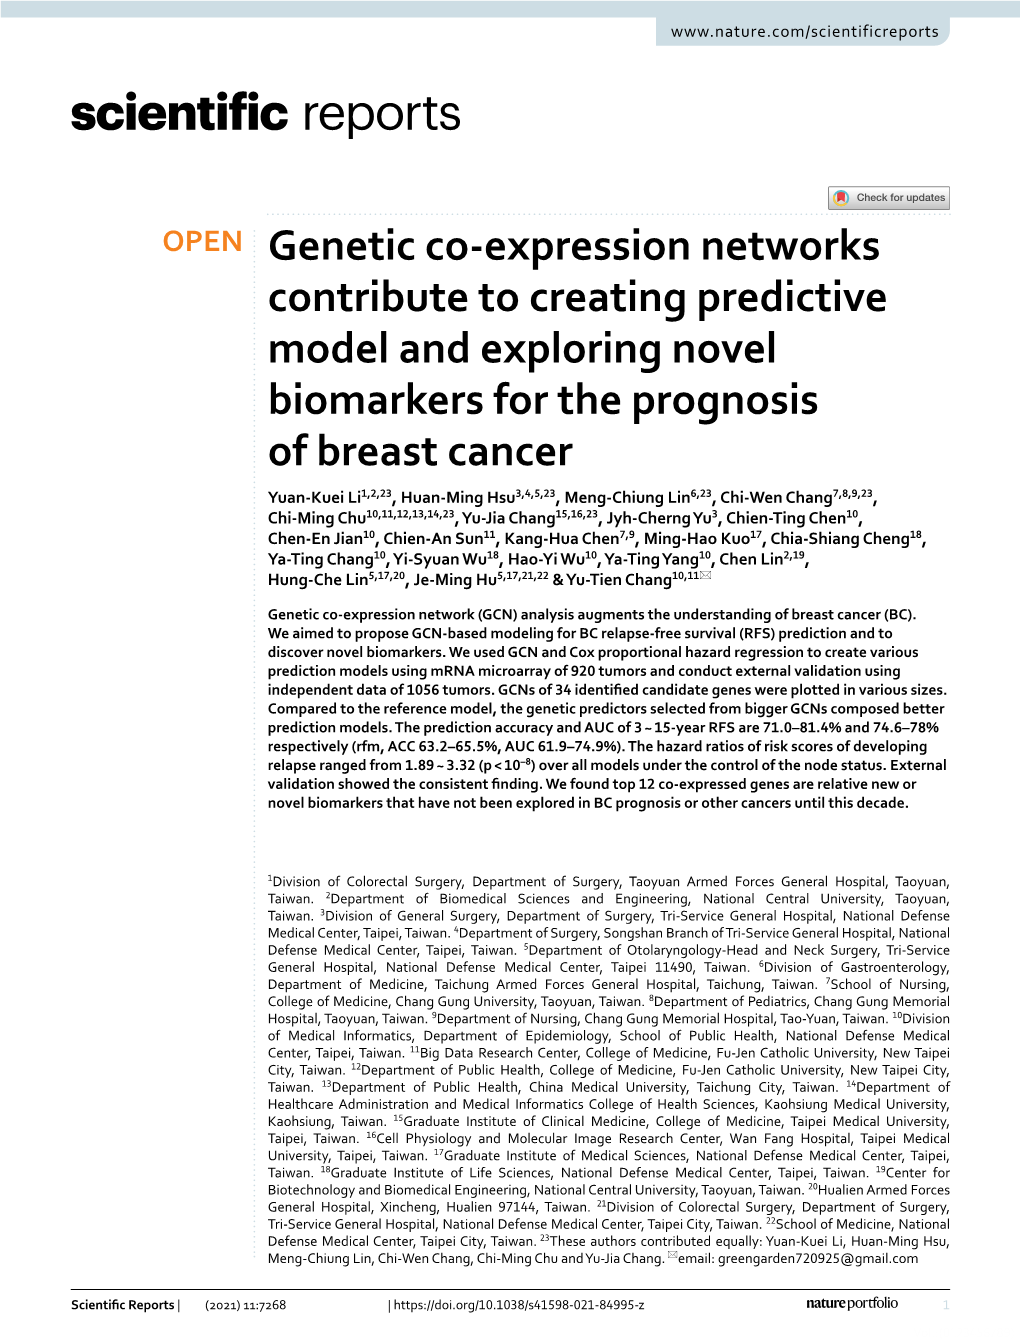 Genetic Co-Expression Networks Contribute to Creating Predictive